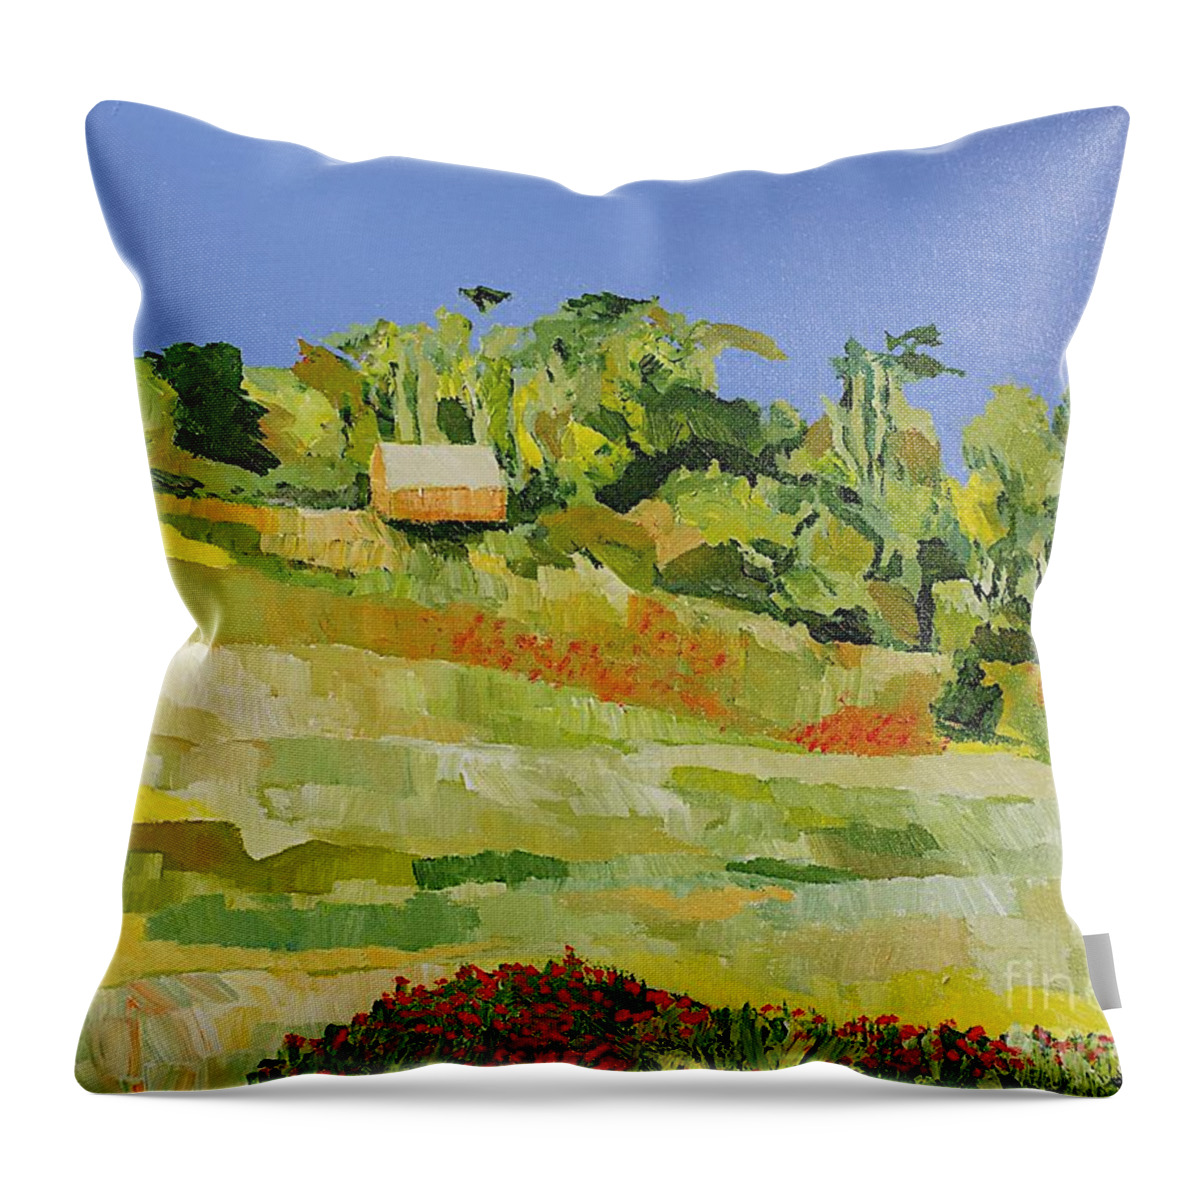 Landscape Throw Pillow featuring the painting Warm and Sunny by Allan P Friedlander